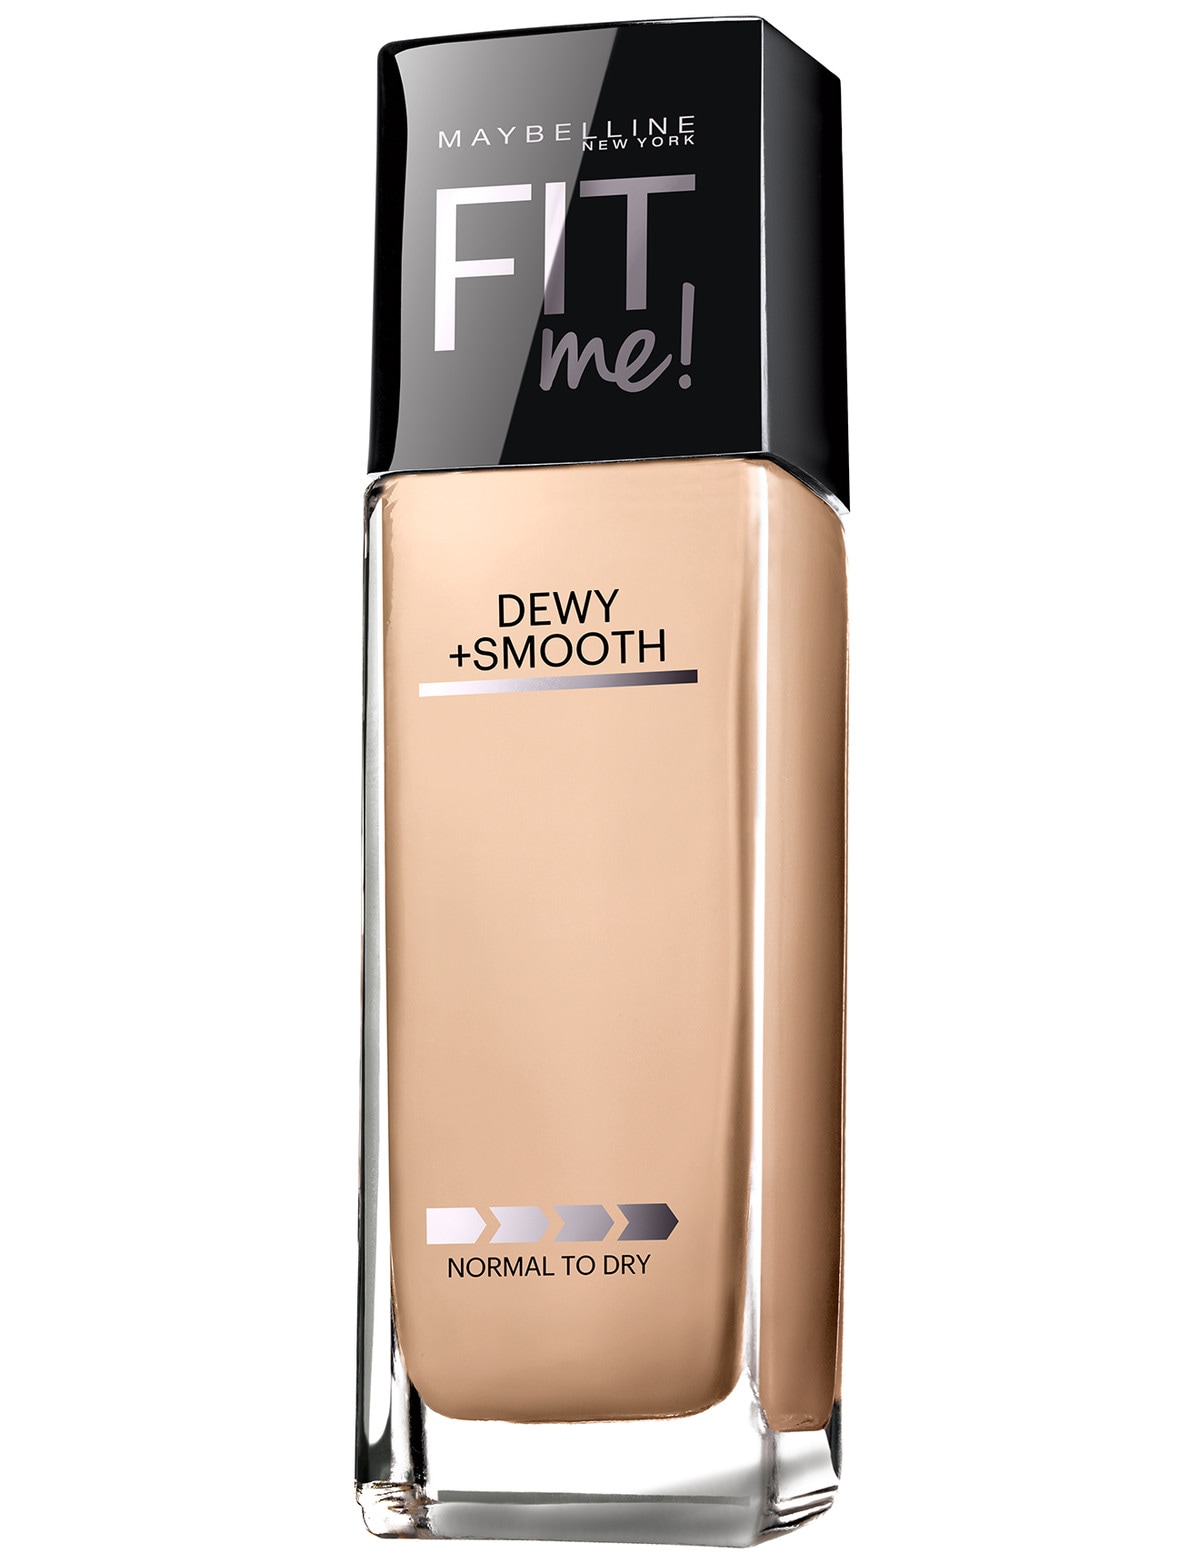 Fit Me Foundation, 30 ml – Maybelline New York : Foundation